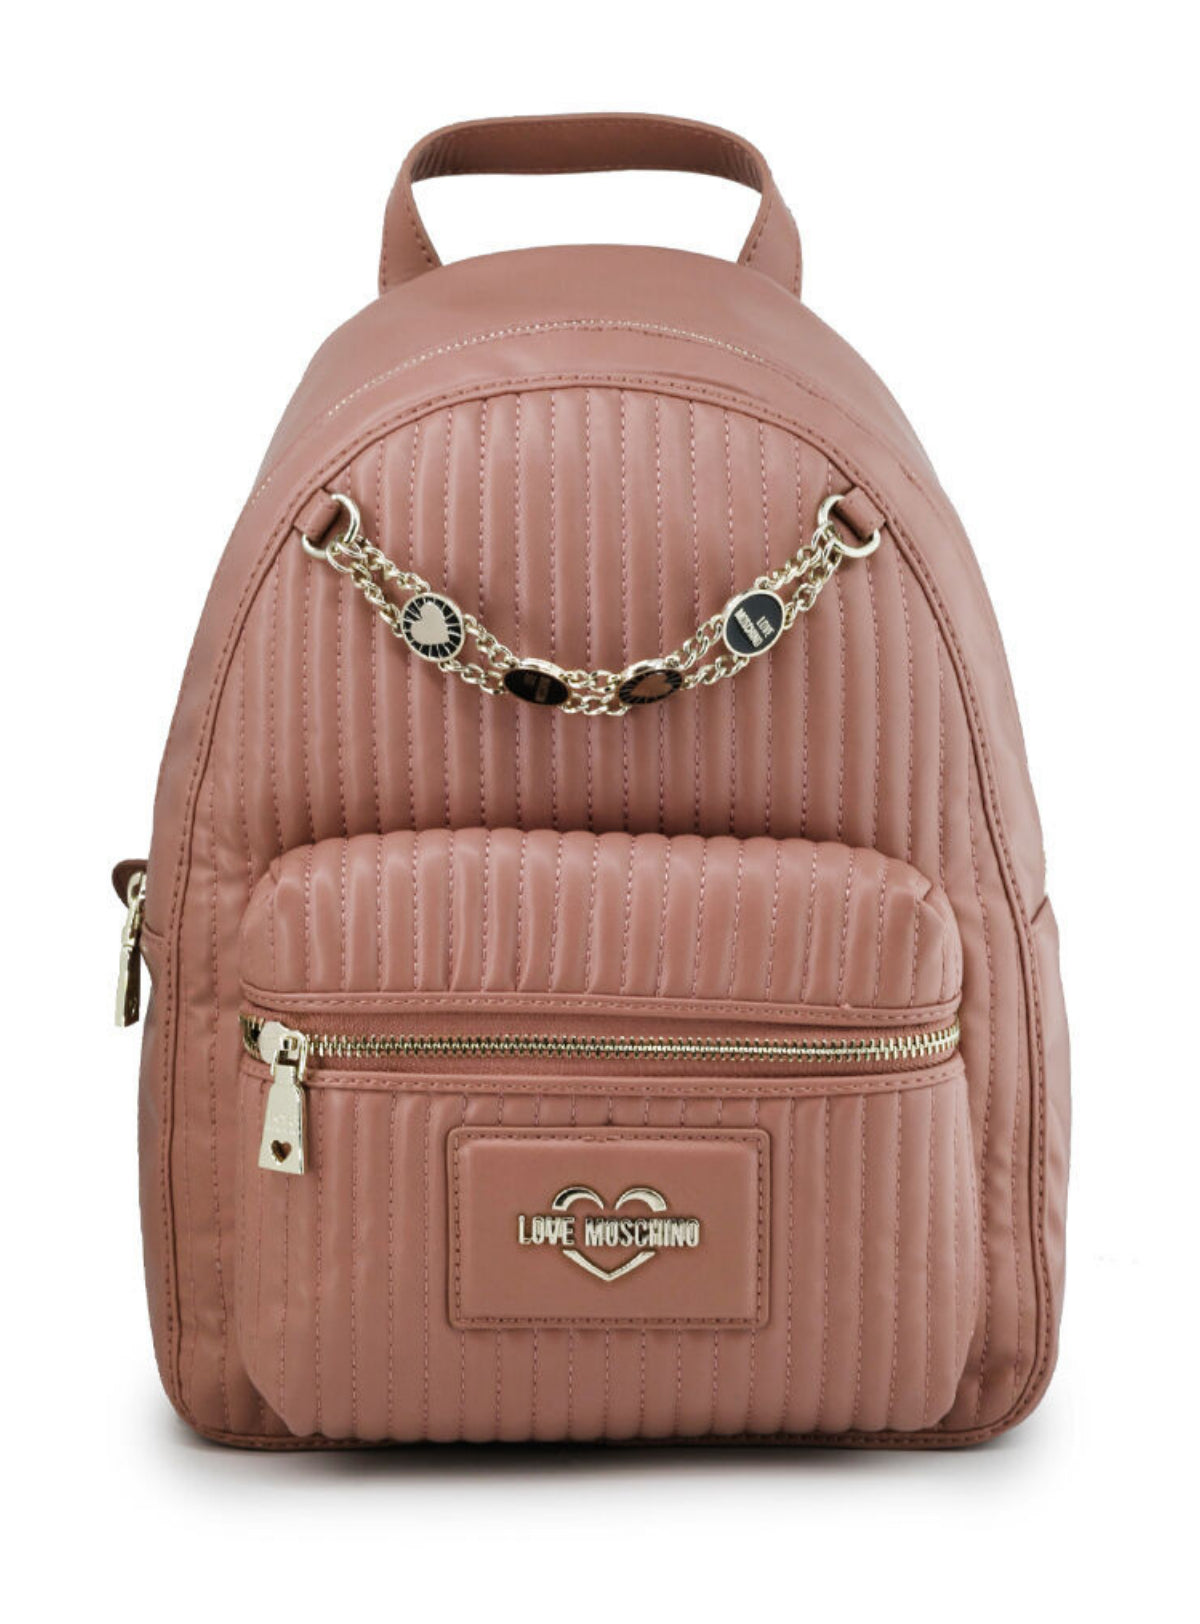 chanel pink backpack purse